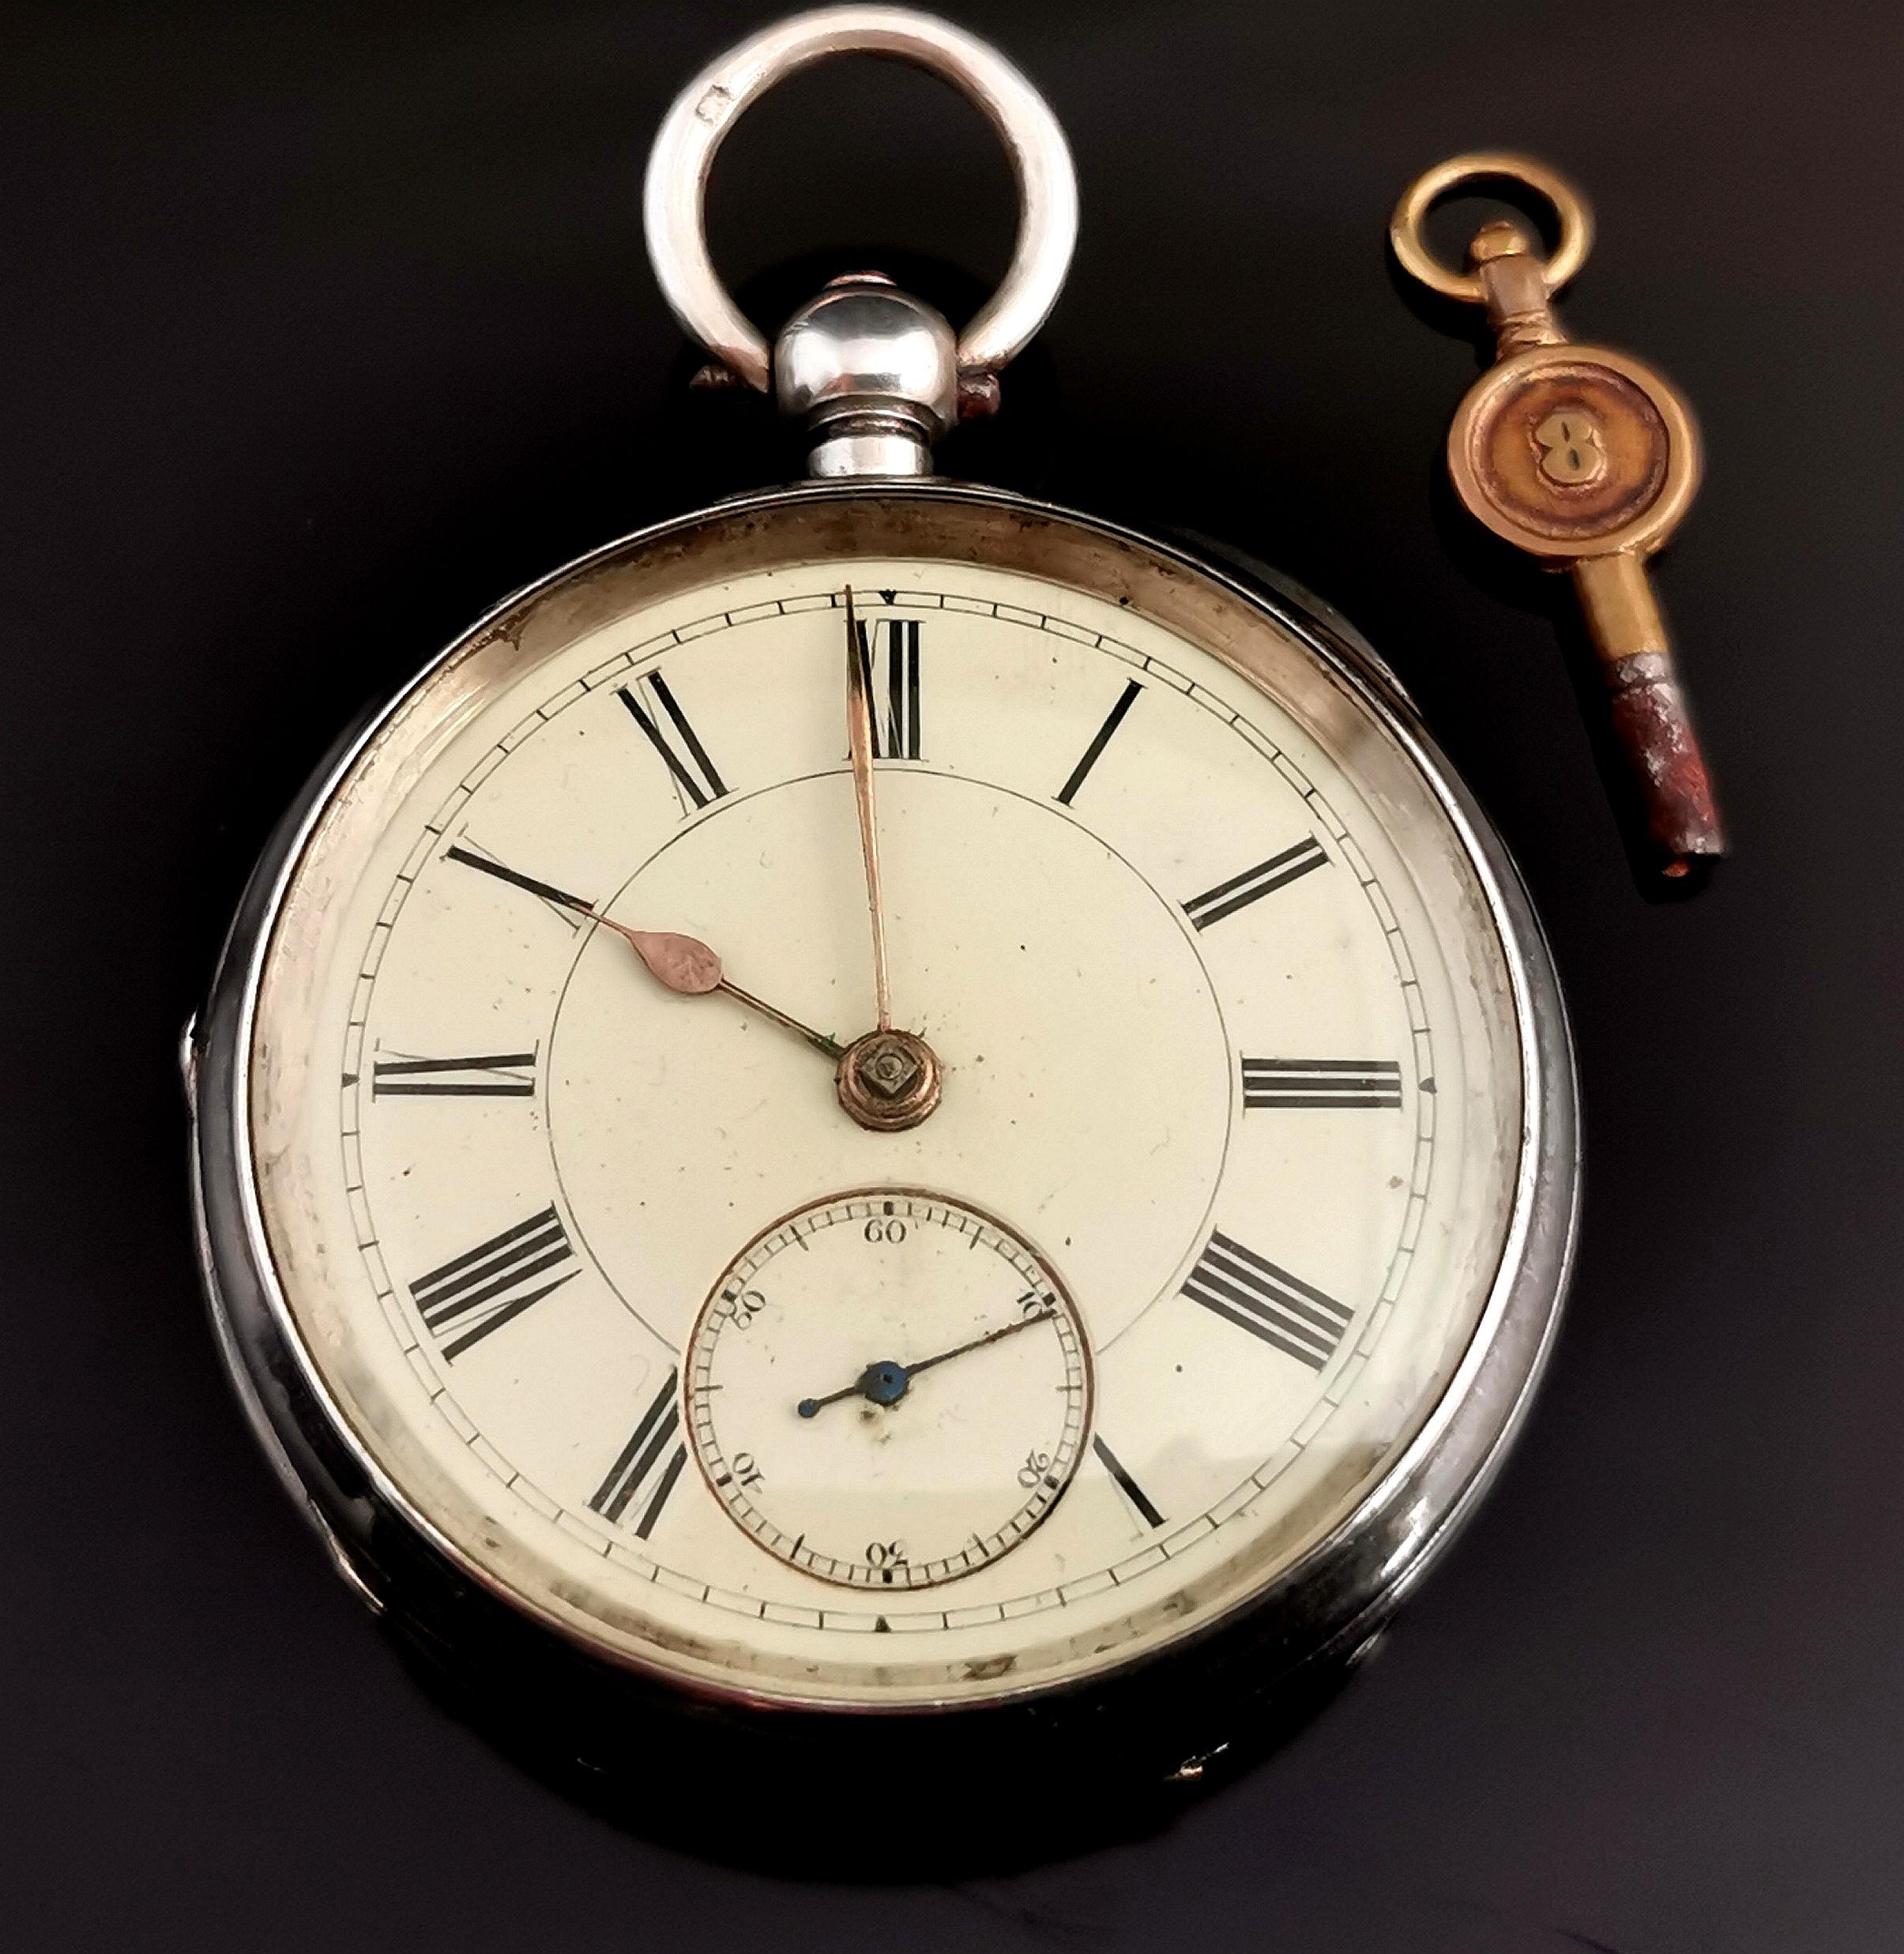 A handsome antique sterling silver cased pocket watch.

A Swiss Fusee movement, it is a well made watch with a heavy sterling silver case.

The case is fully hallmarked for sterling silver, Birmingham assay office, 1896, maker William Ehrhardt.

It